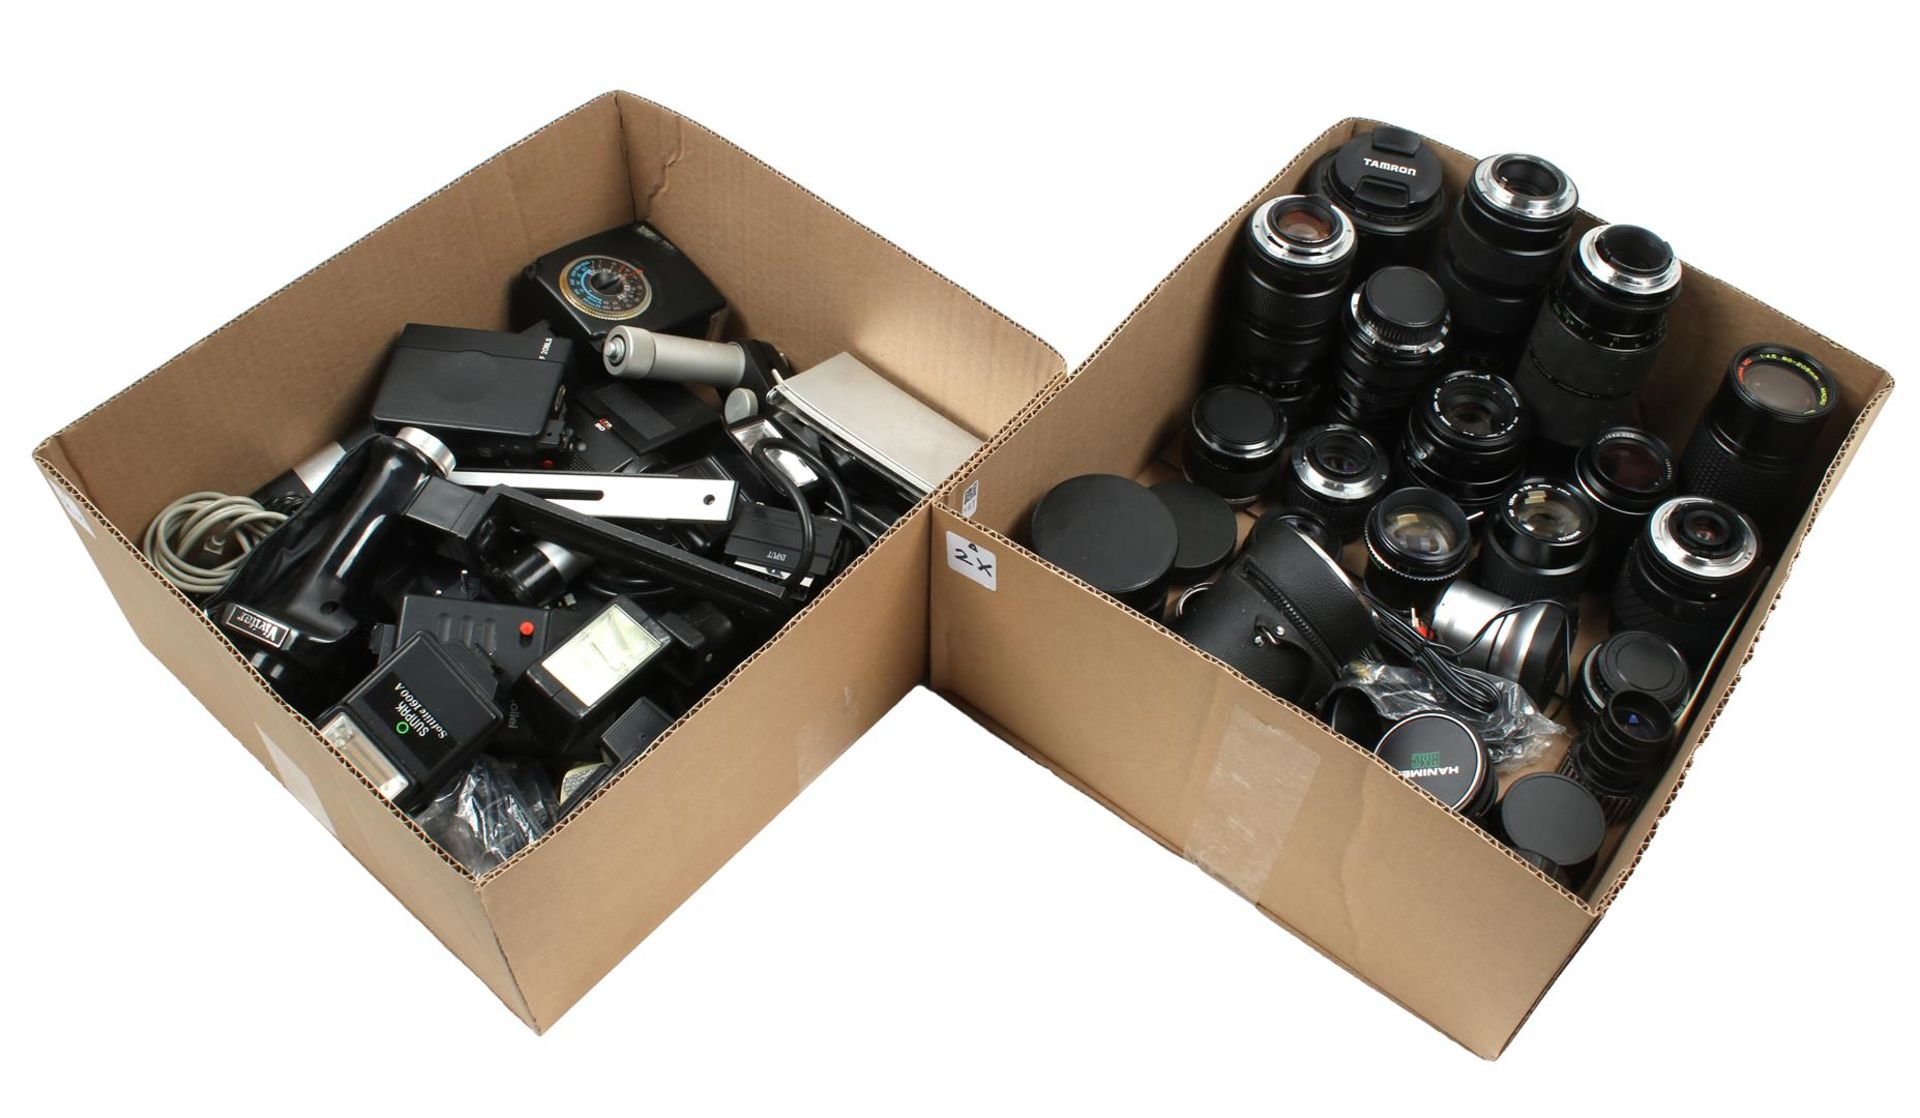 Box with various lenses for cameras and box with flashes and accessories for cameras